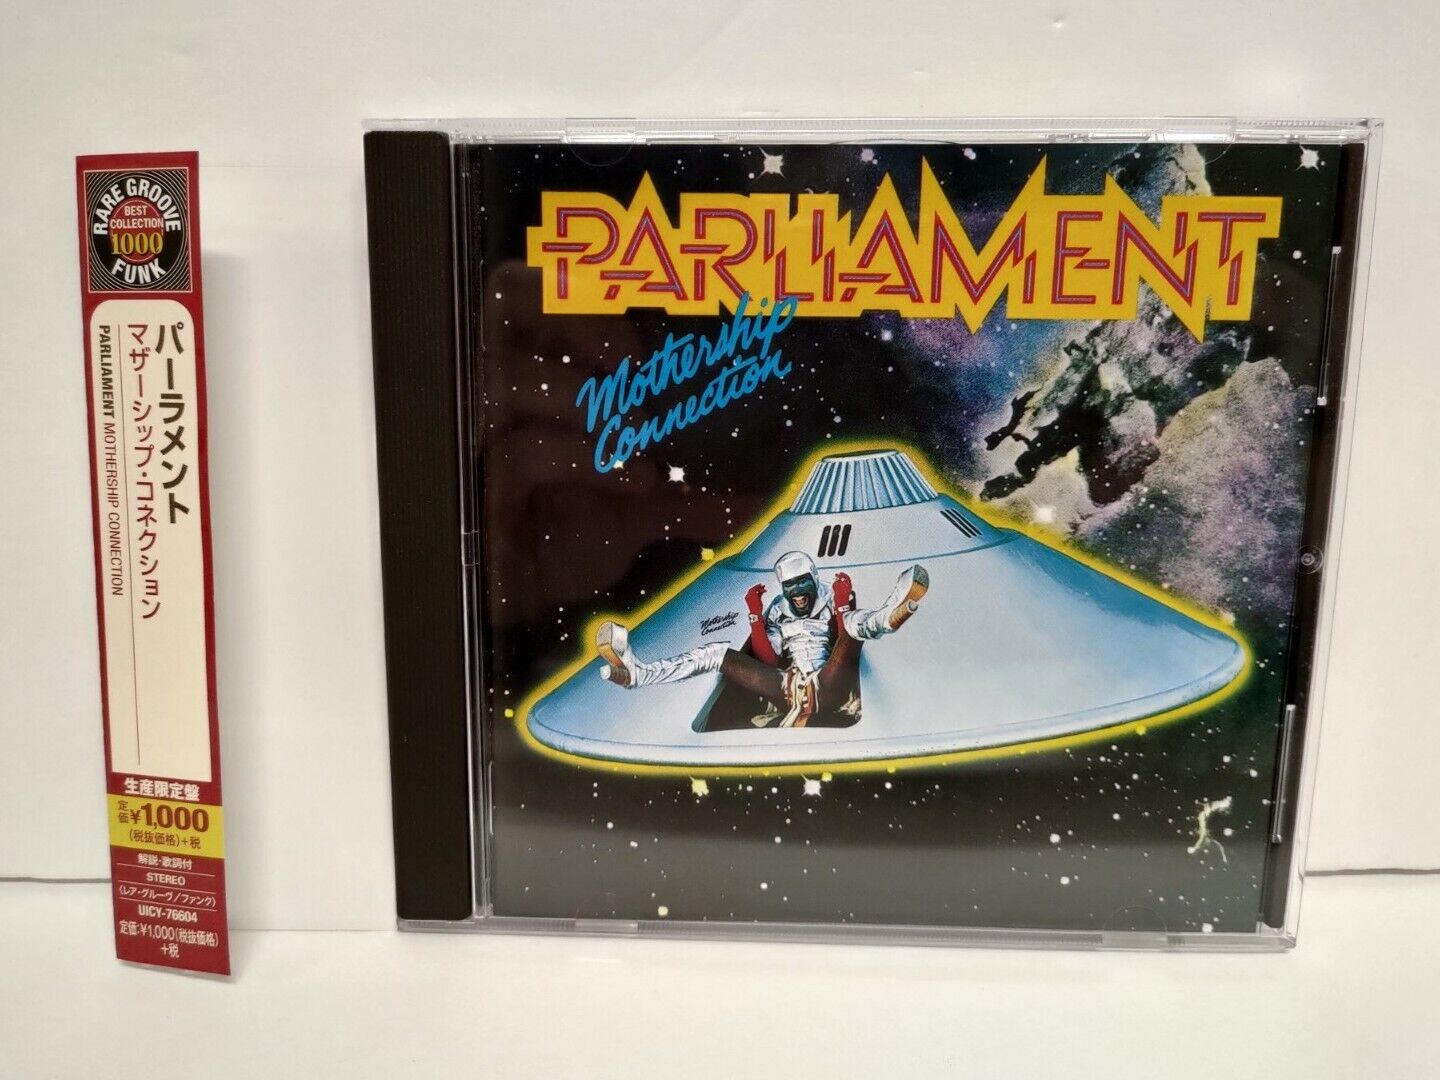 PARLIAMENT Mothership Connection CD Japan Rare Groove